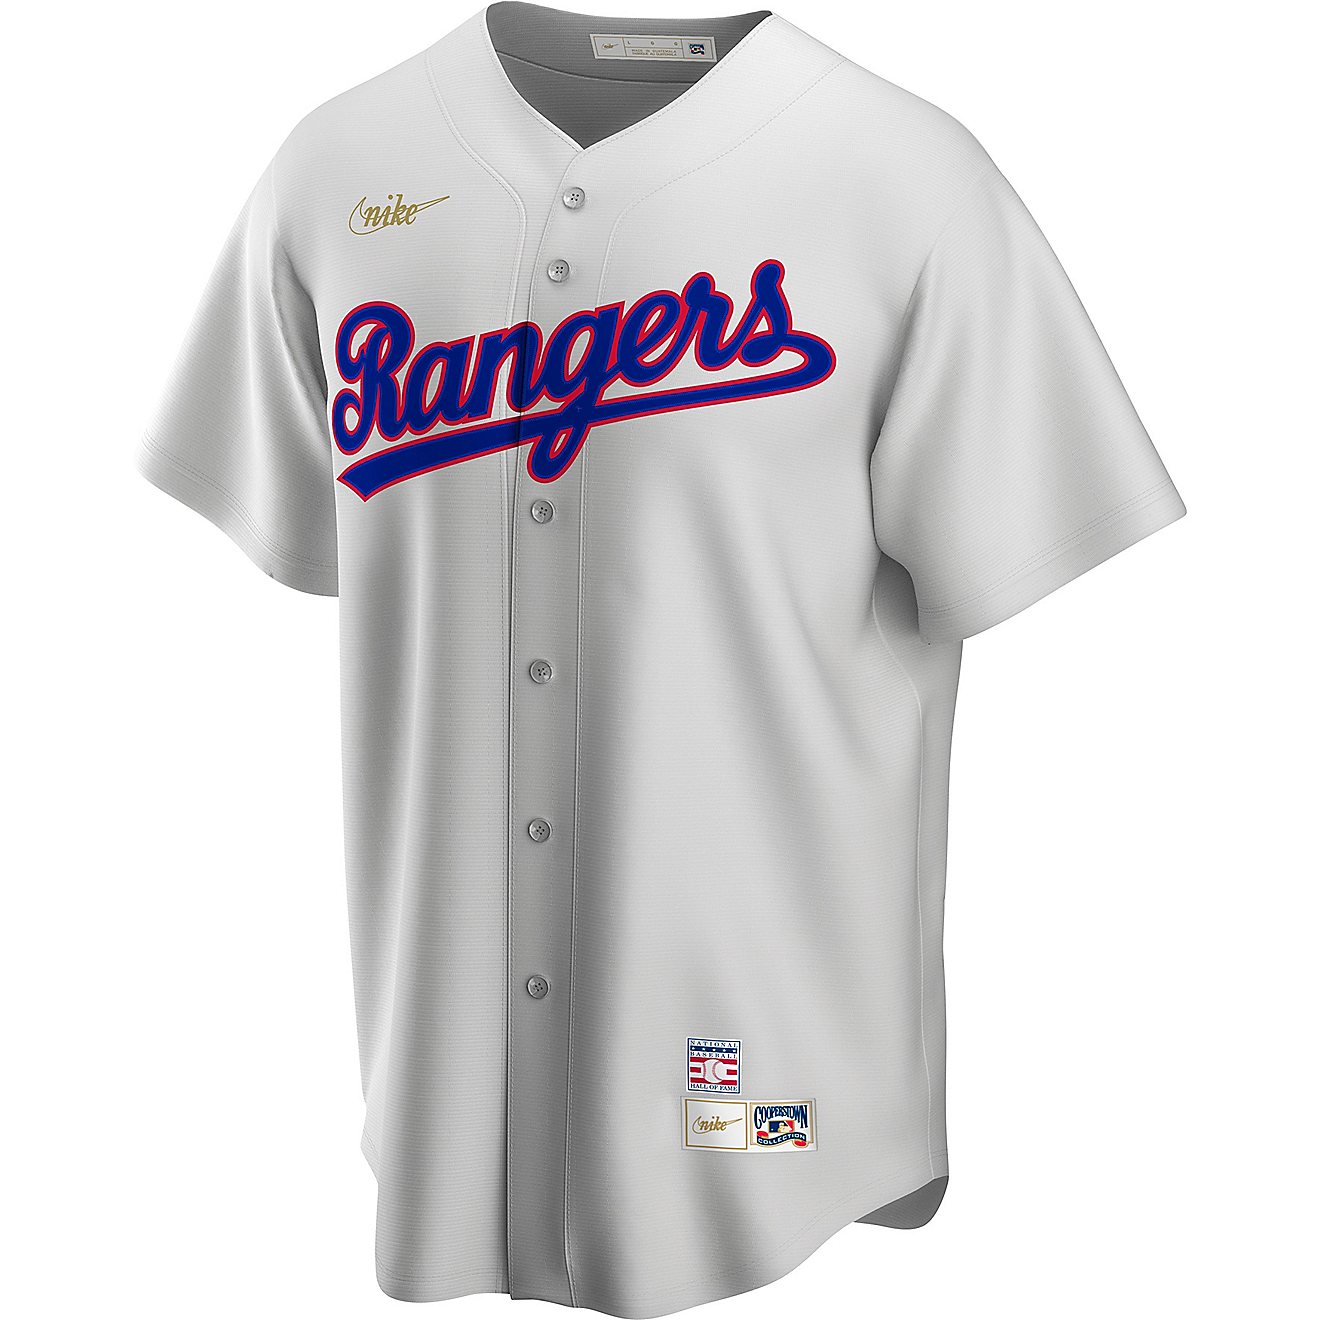 Nike Men's Texas Rangers Official Player Cooperstown Jersey                                                                      - view number 2